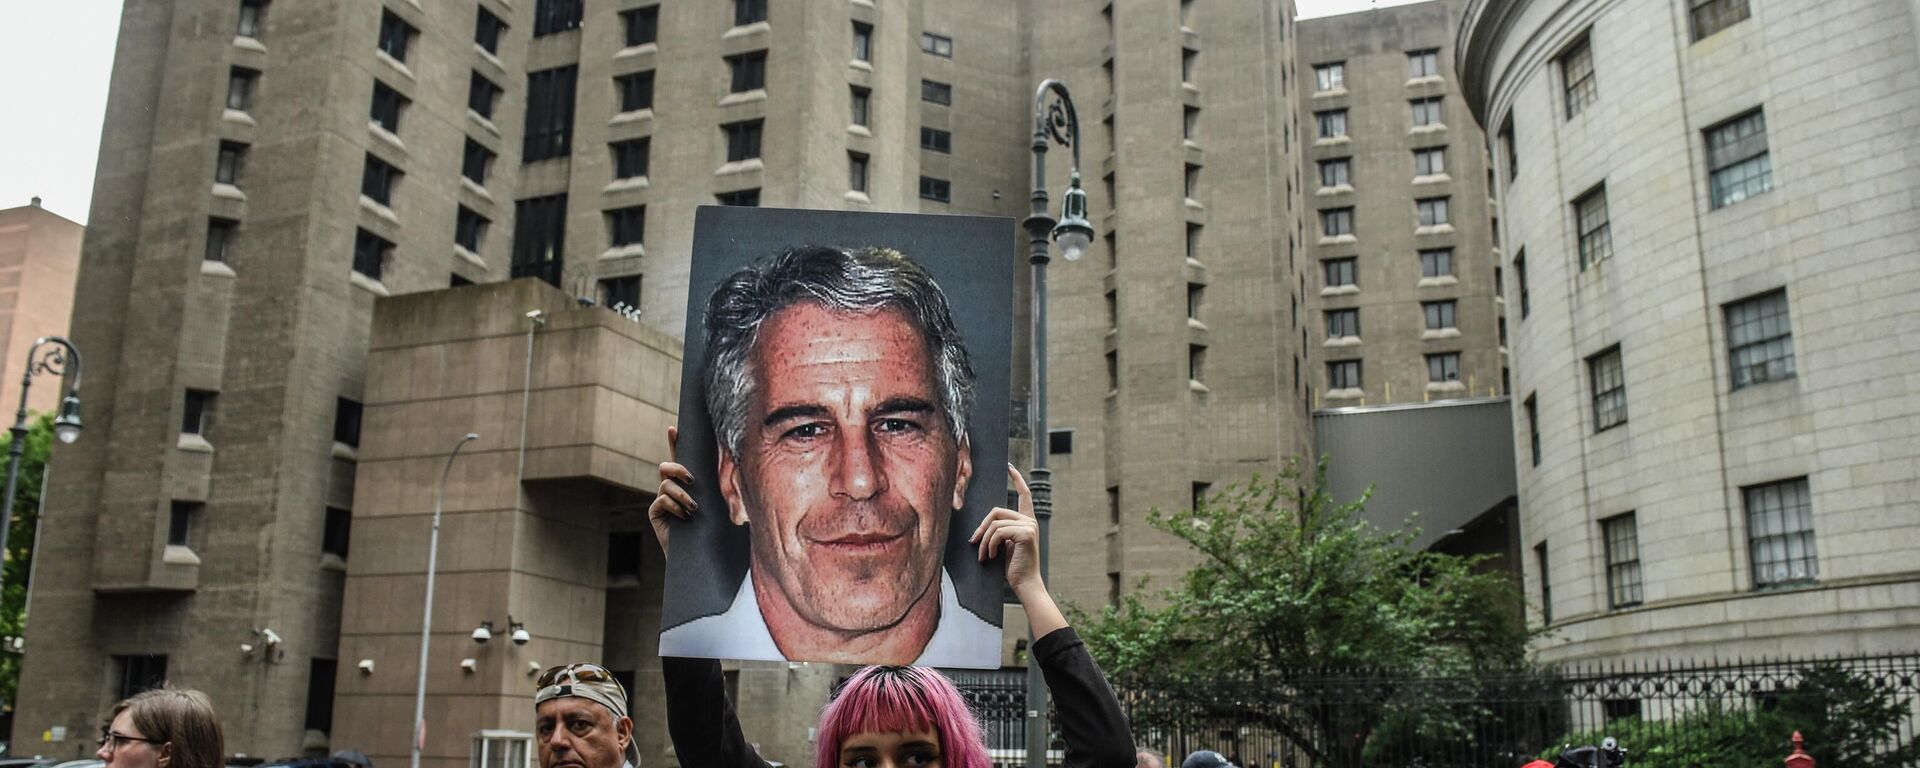 A member of a protest group called Hot Mess holds up a sign of Jeffrey Epstein in front of the Metropolitan Correction Center on July 8, 2019 in New York City. - Sputnik International, 1920, 05.04.2022